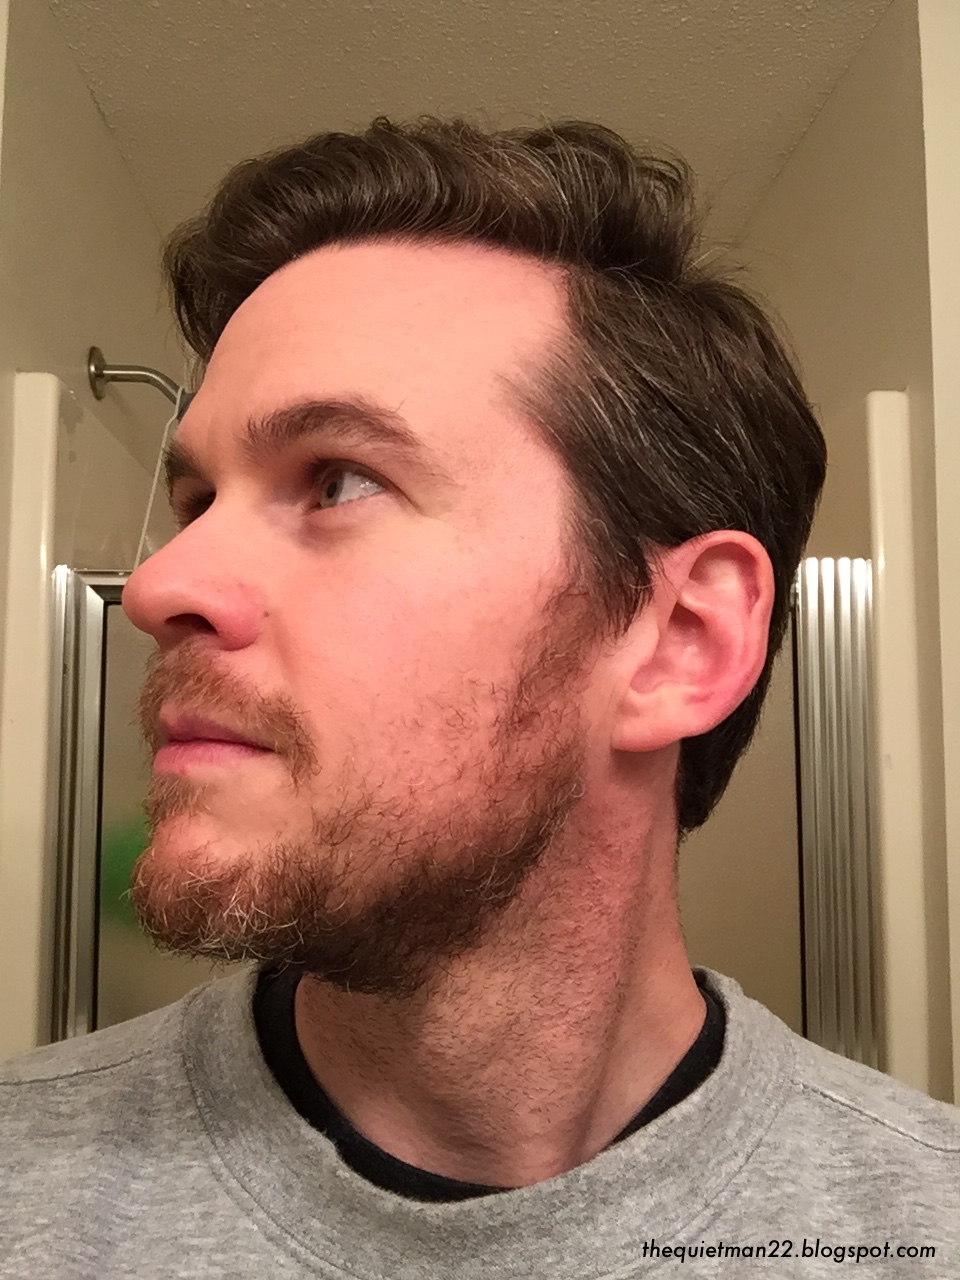 Bye-bye beard: The end of No-shave November 2018